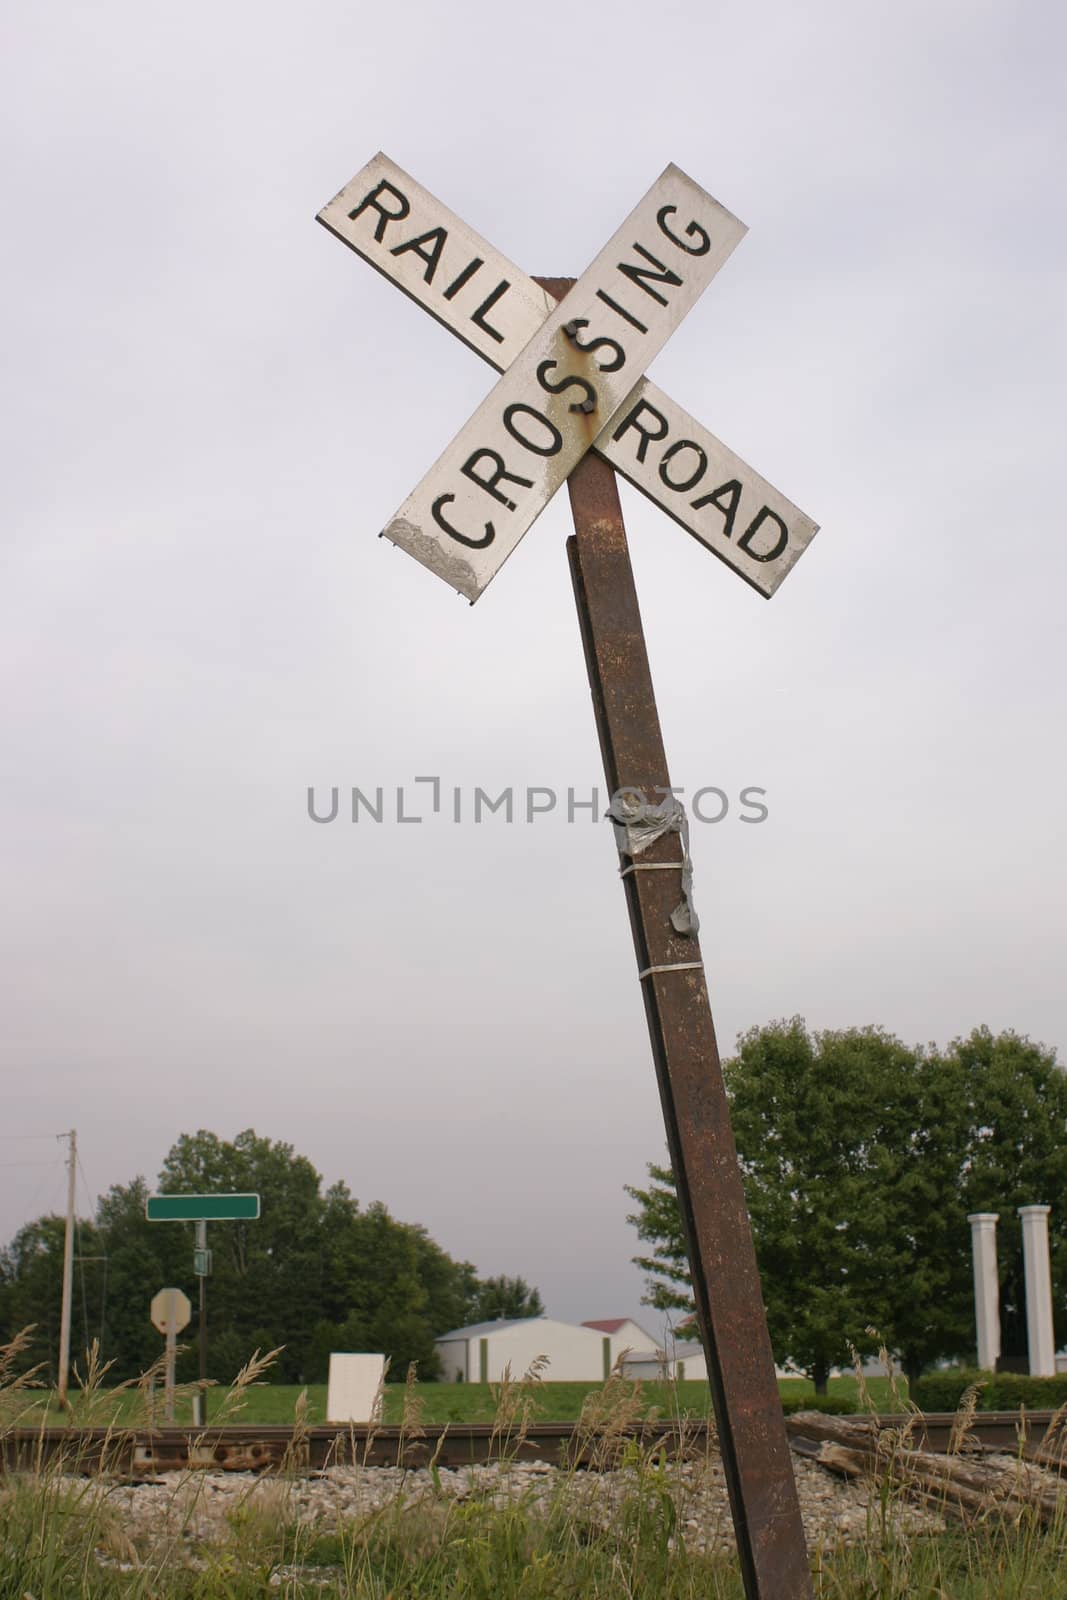 Simple country railway crossing sign